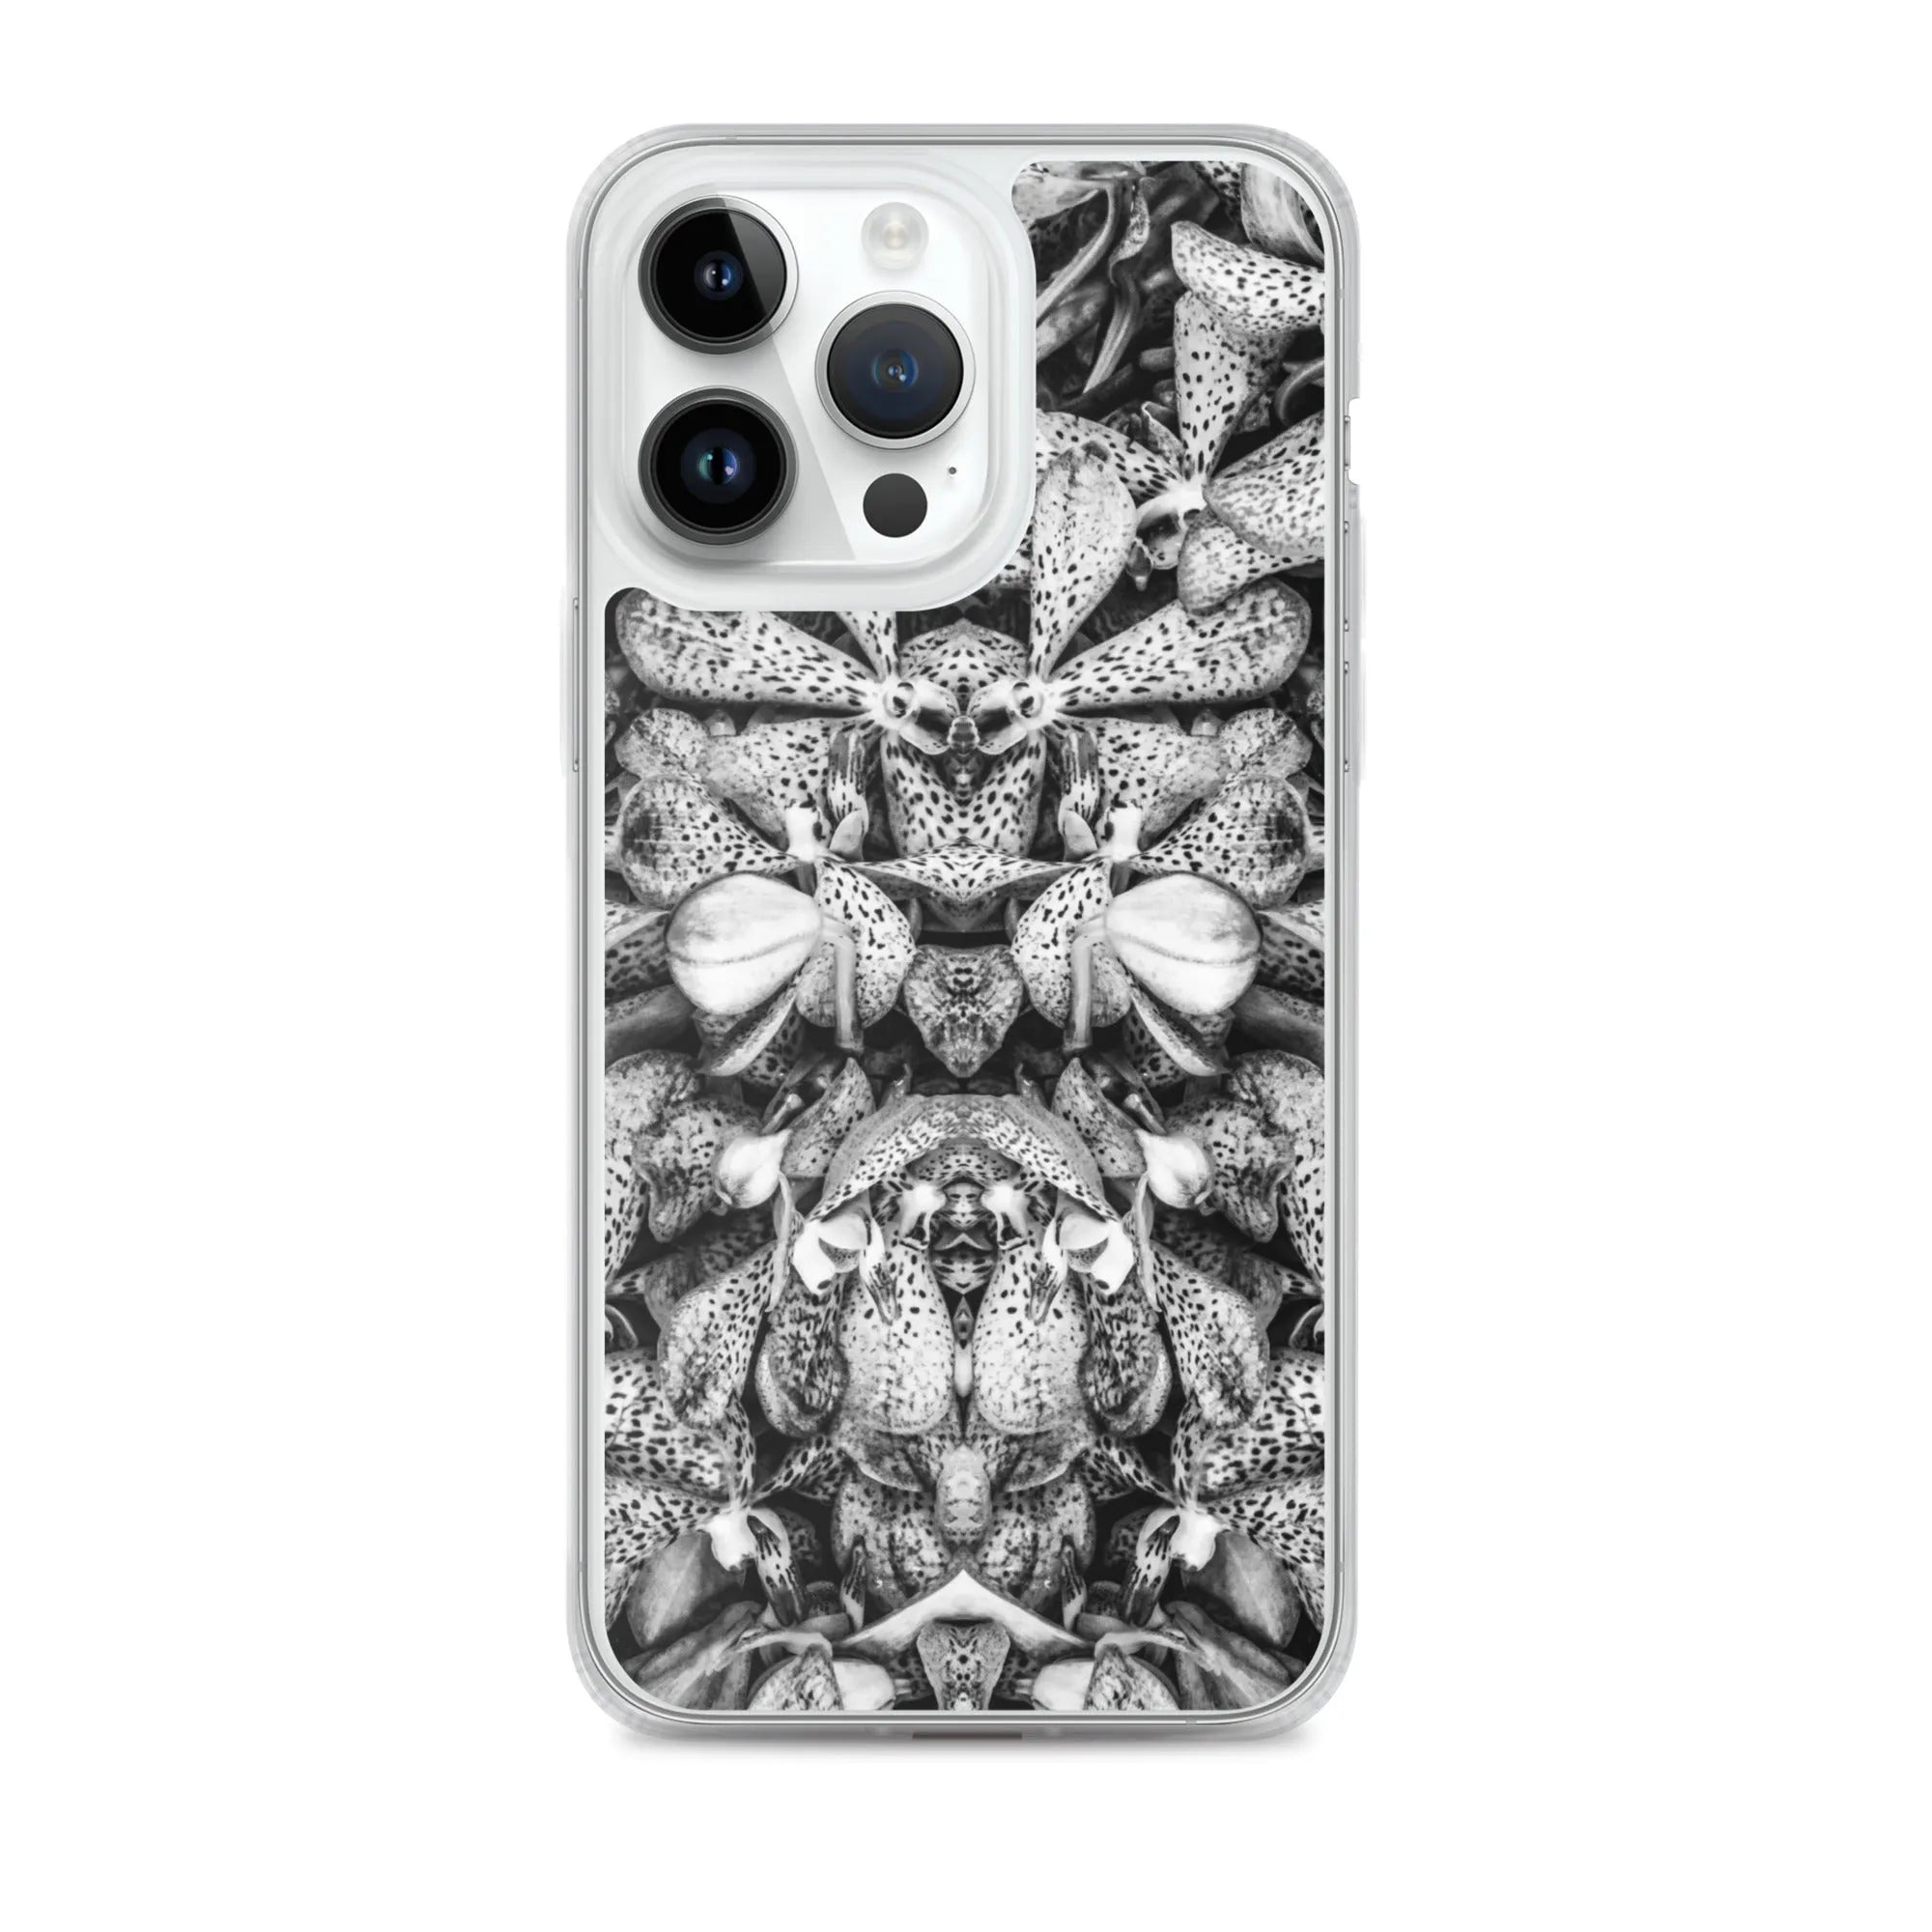 Tickled Pink² Floral Iphone Case - Black And White - Iphone 14 Pro Max - Mobile Phone Cases - Aesthetic Art